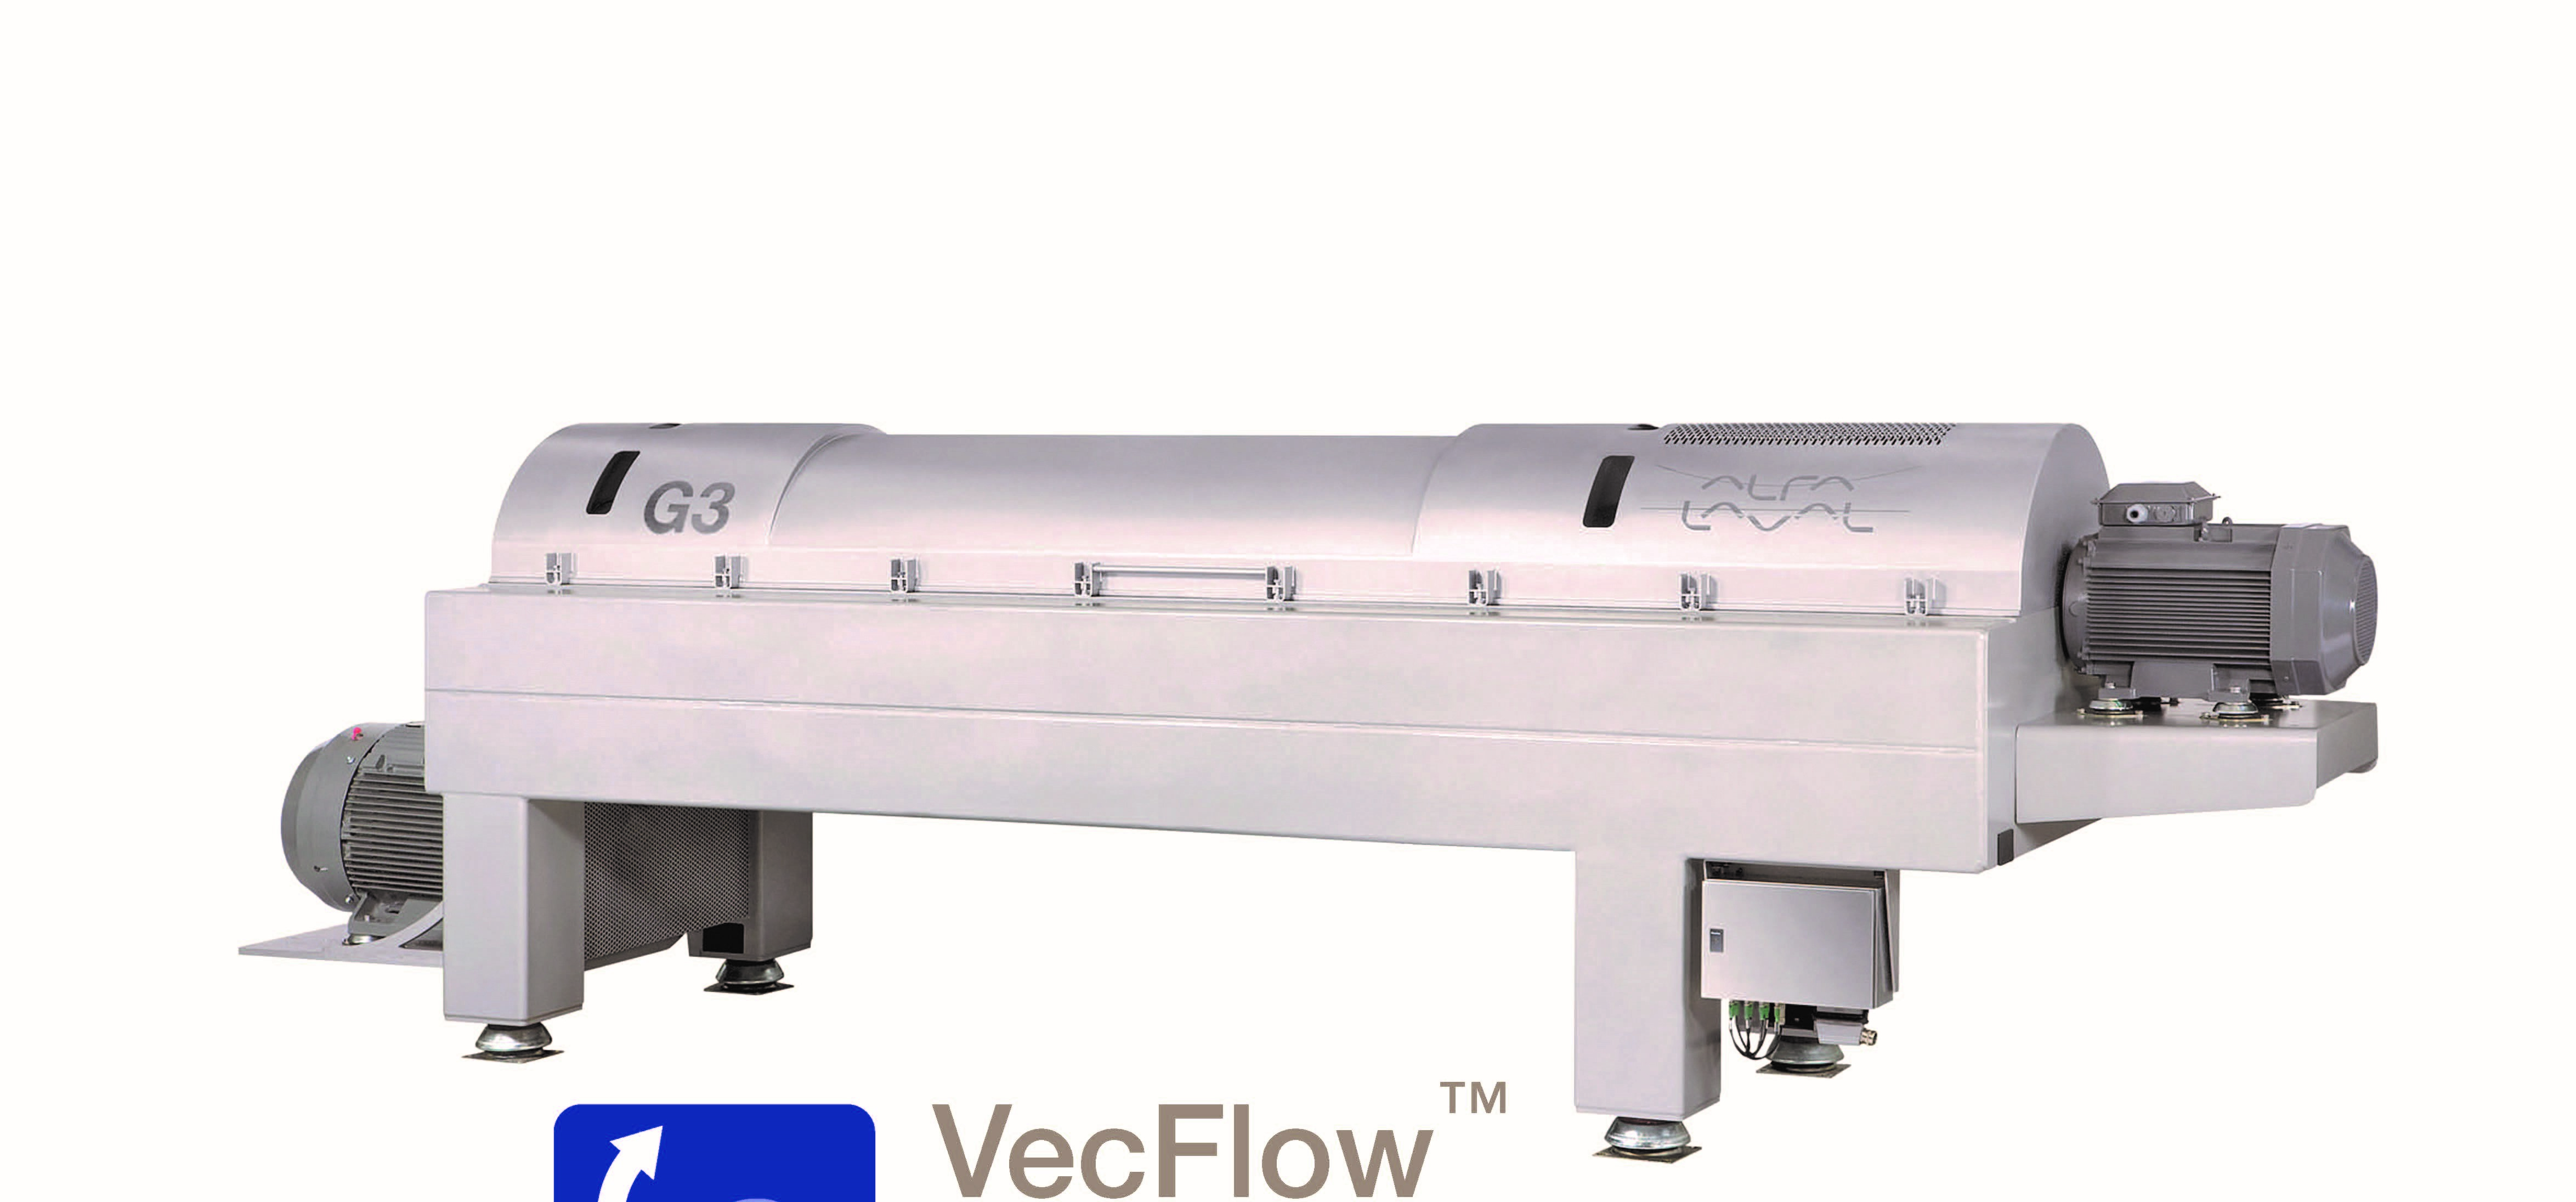 Alfa Laval’s ALDEC G3 VecFlow decanter centrifuge for sludge dewatering and thickening features the company’s VecFlow feed zone.